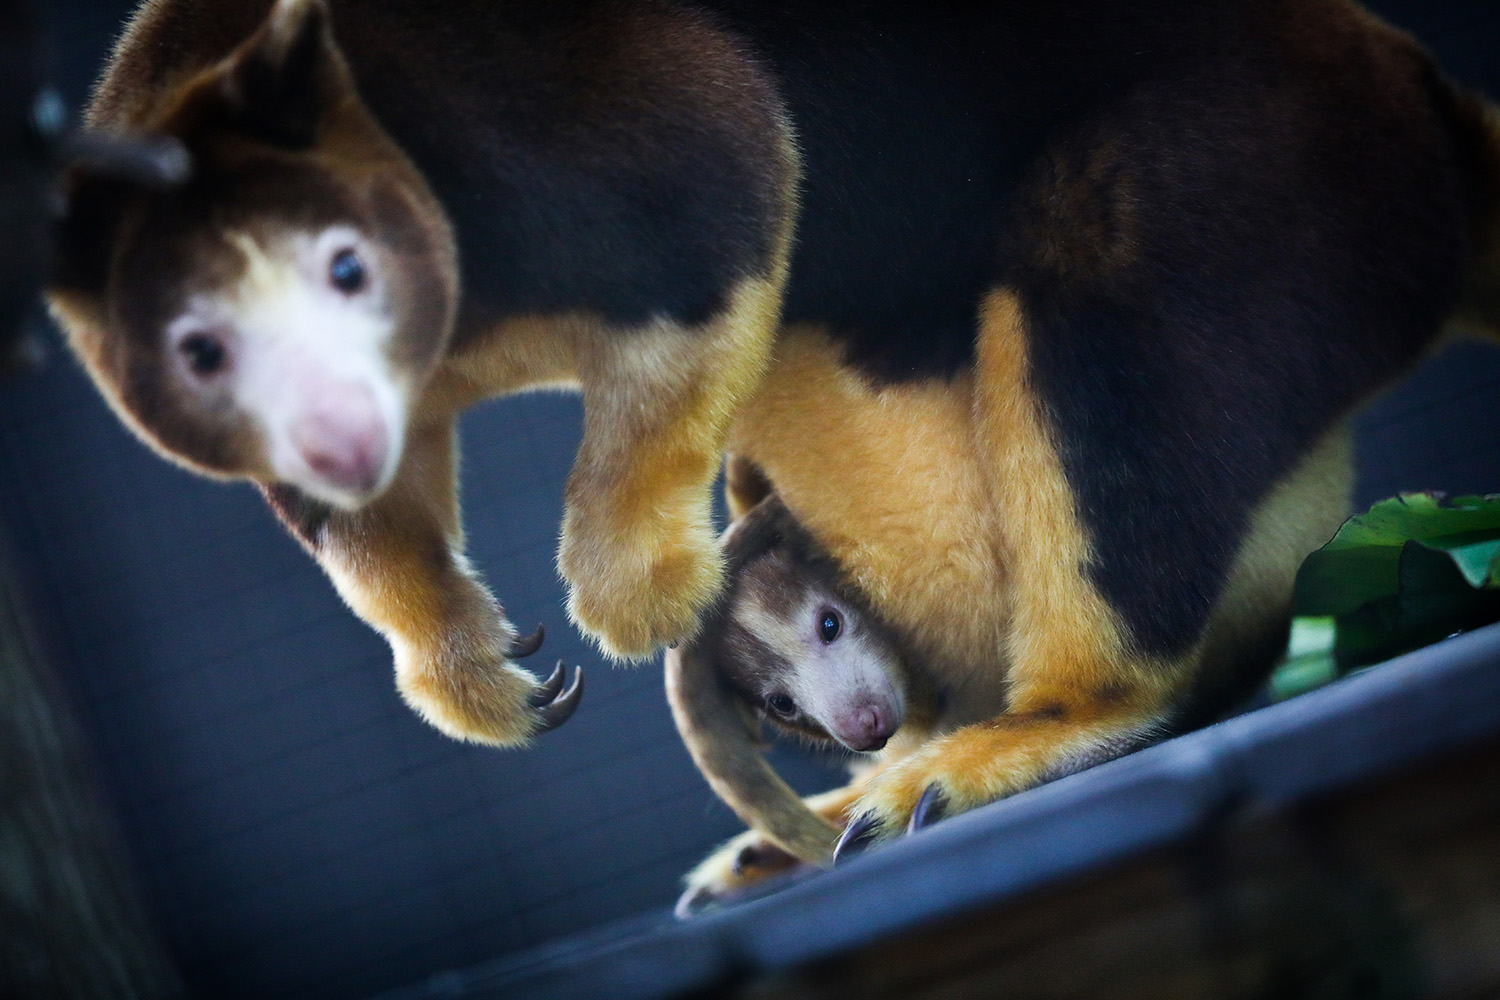 The female Matschie's Tree Kangaroo with her joey in their enclosure at the Santa Fe College Teaching Zoo on Thursday, Nov 2, 2017 in Gainesville, FL. *** Subjects have Releases ***